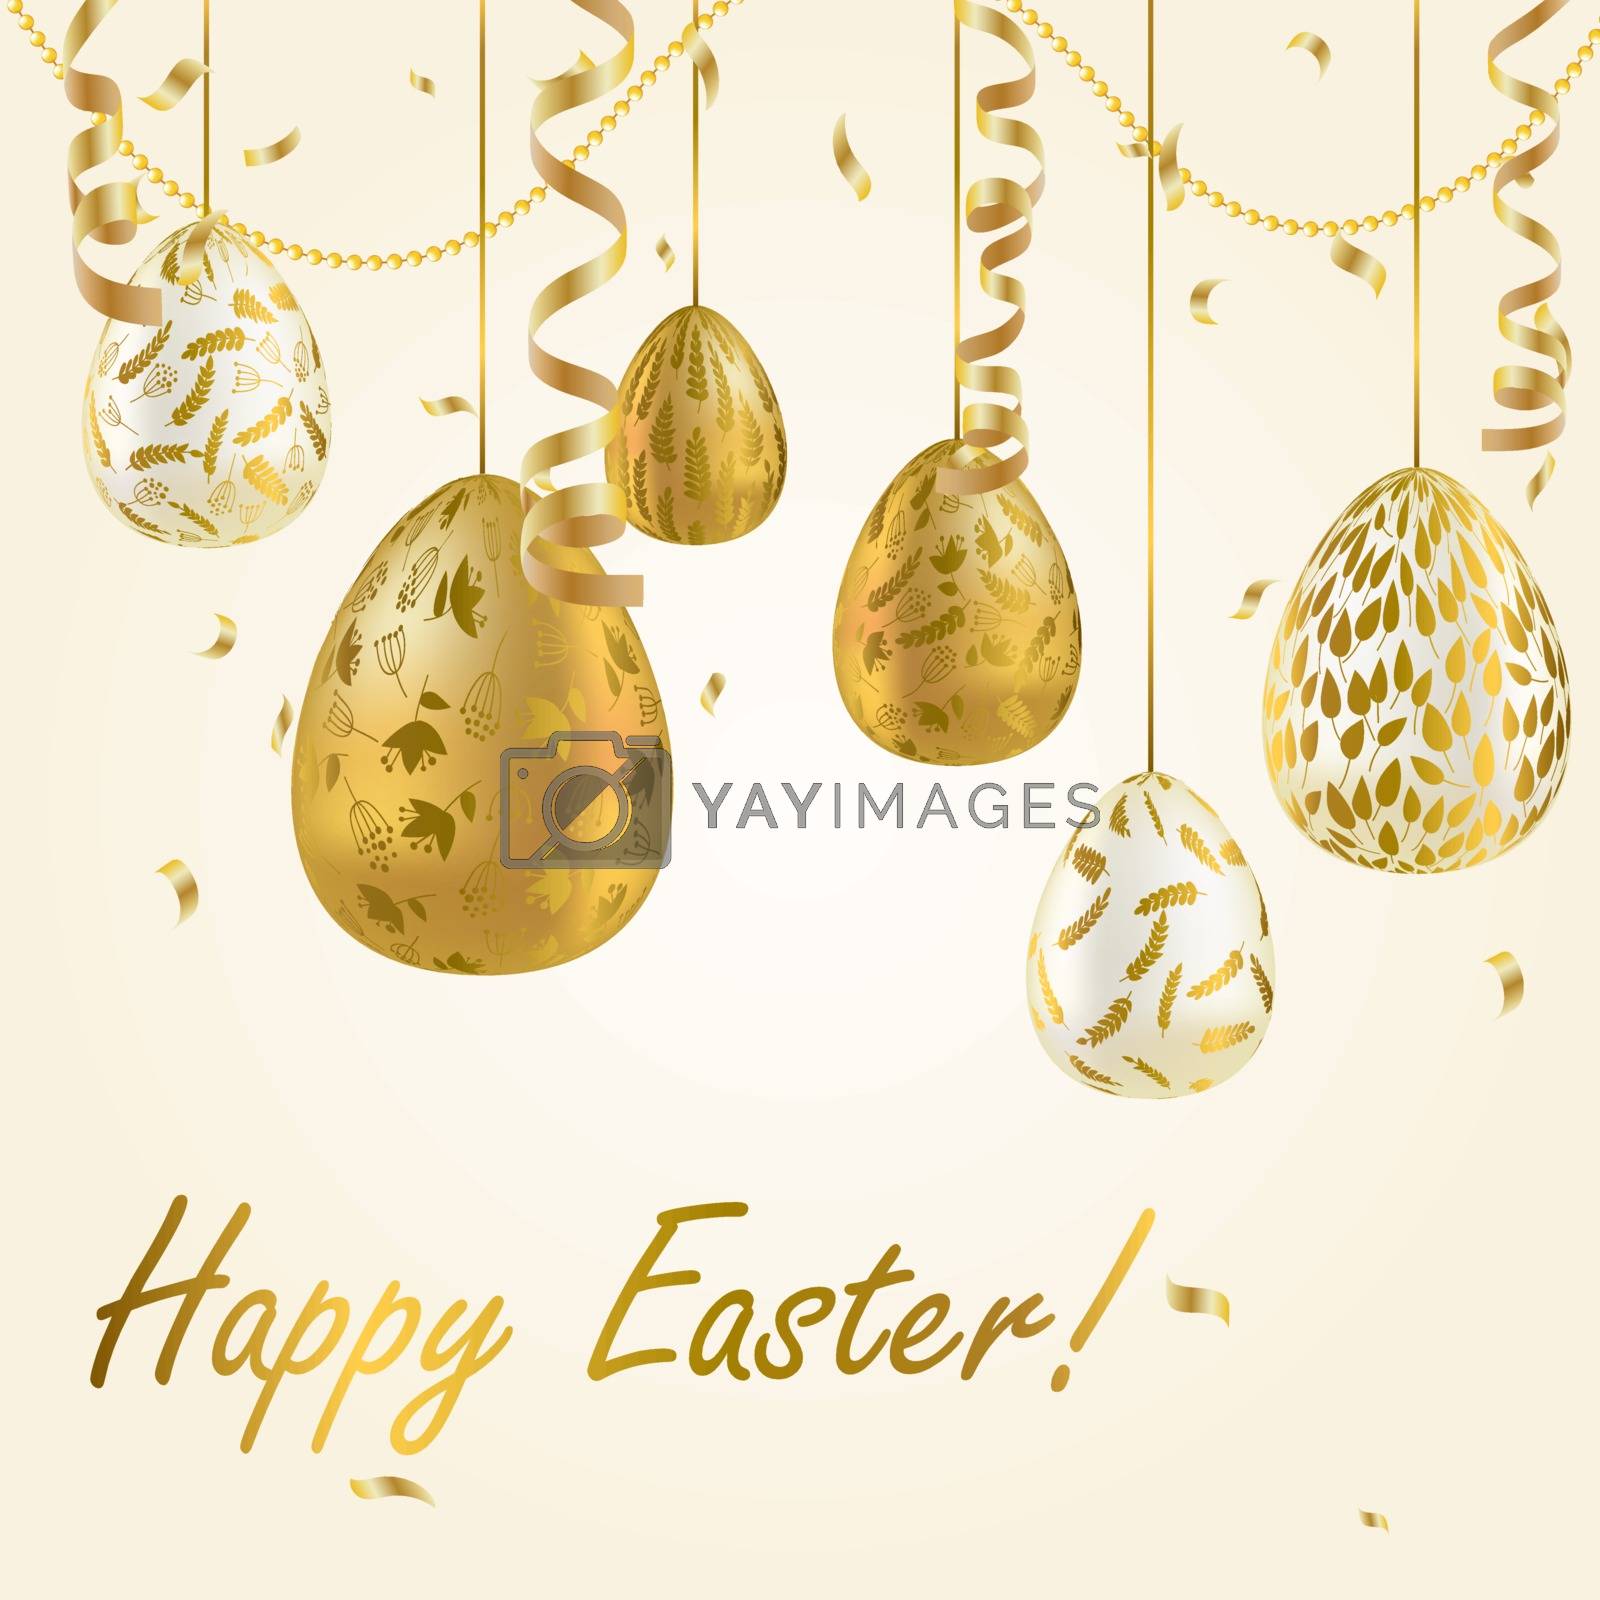 Royalty free image of Easter egg. Greeting card with Golden eggs. Religious holiday vector illustration for poster, flyer. Decorate Golden eggs with plant ornaments on a light background. by LittleCuckoo